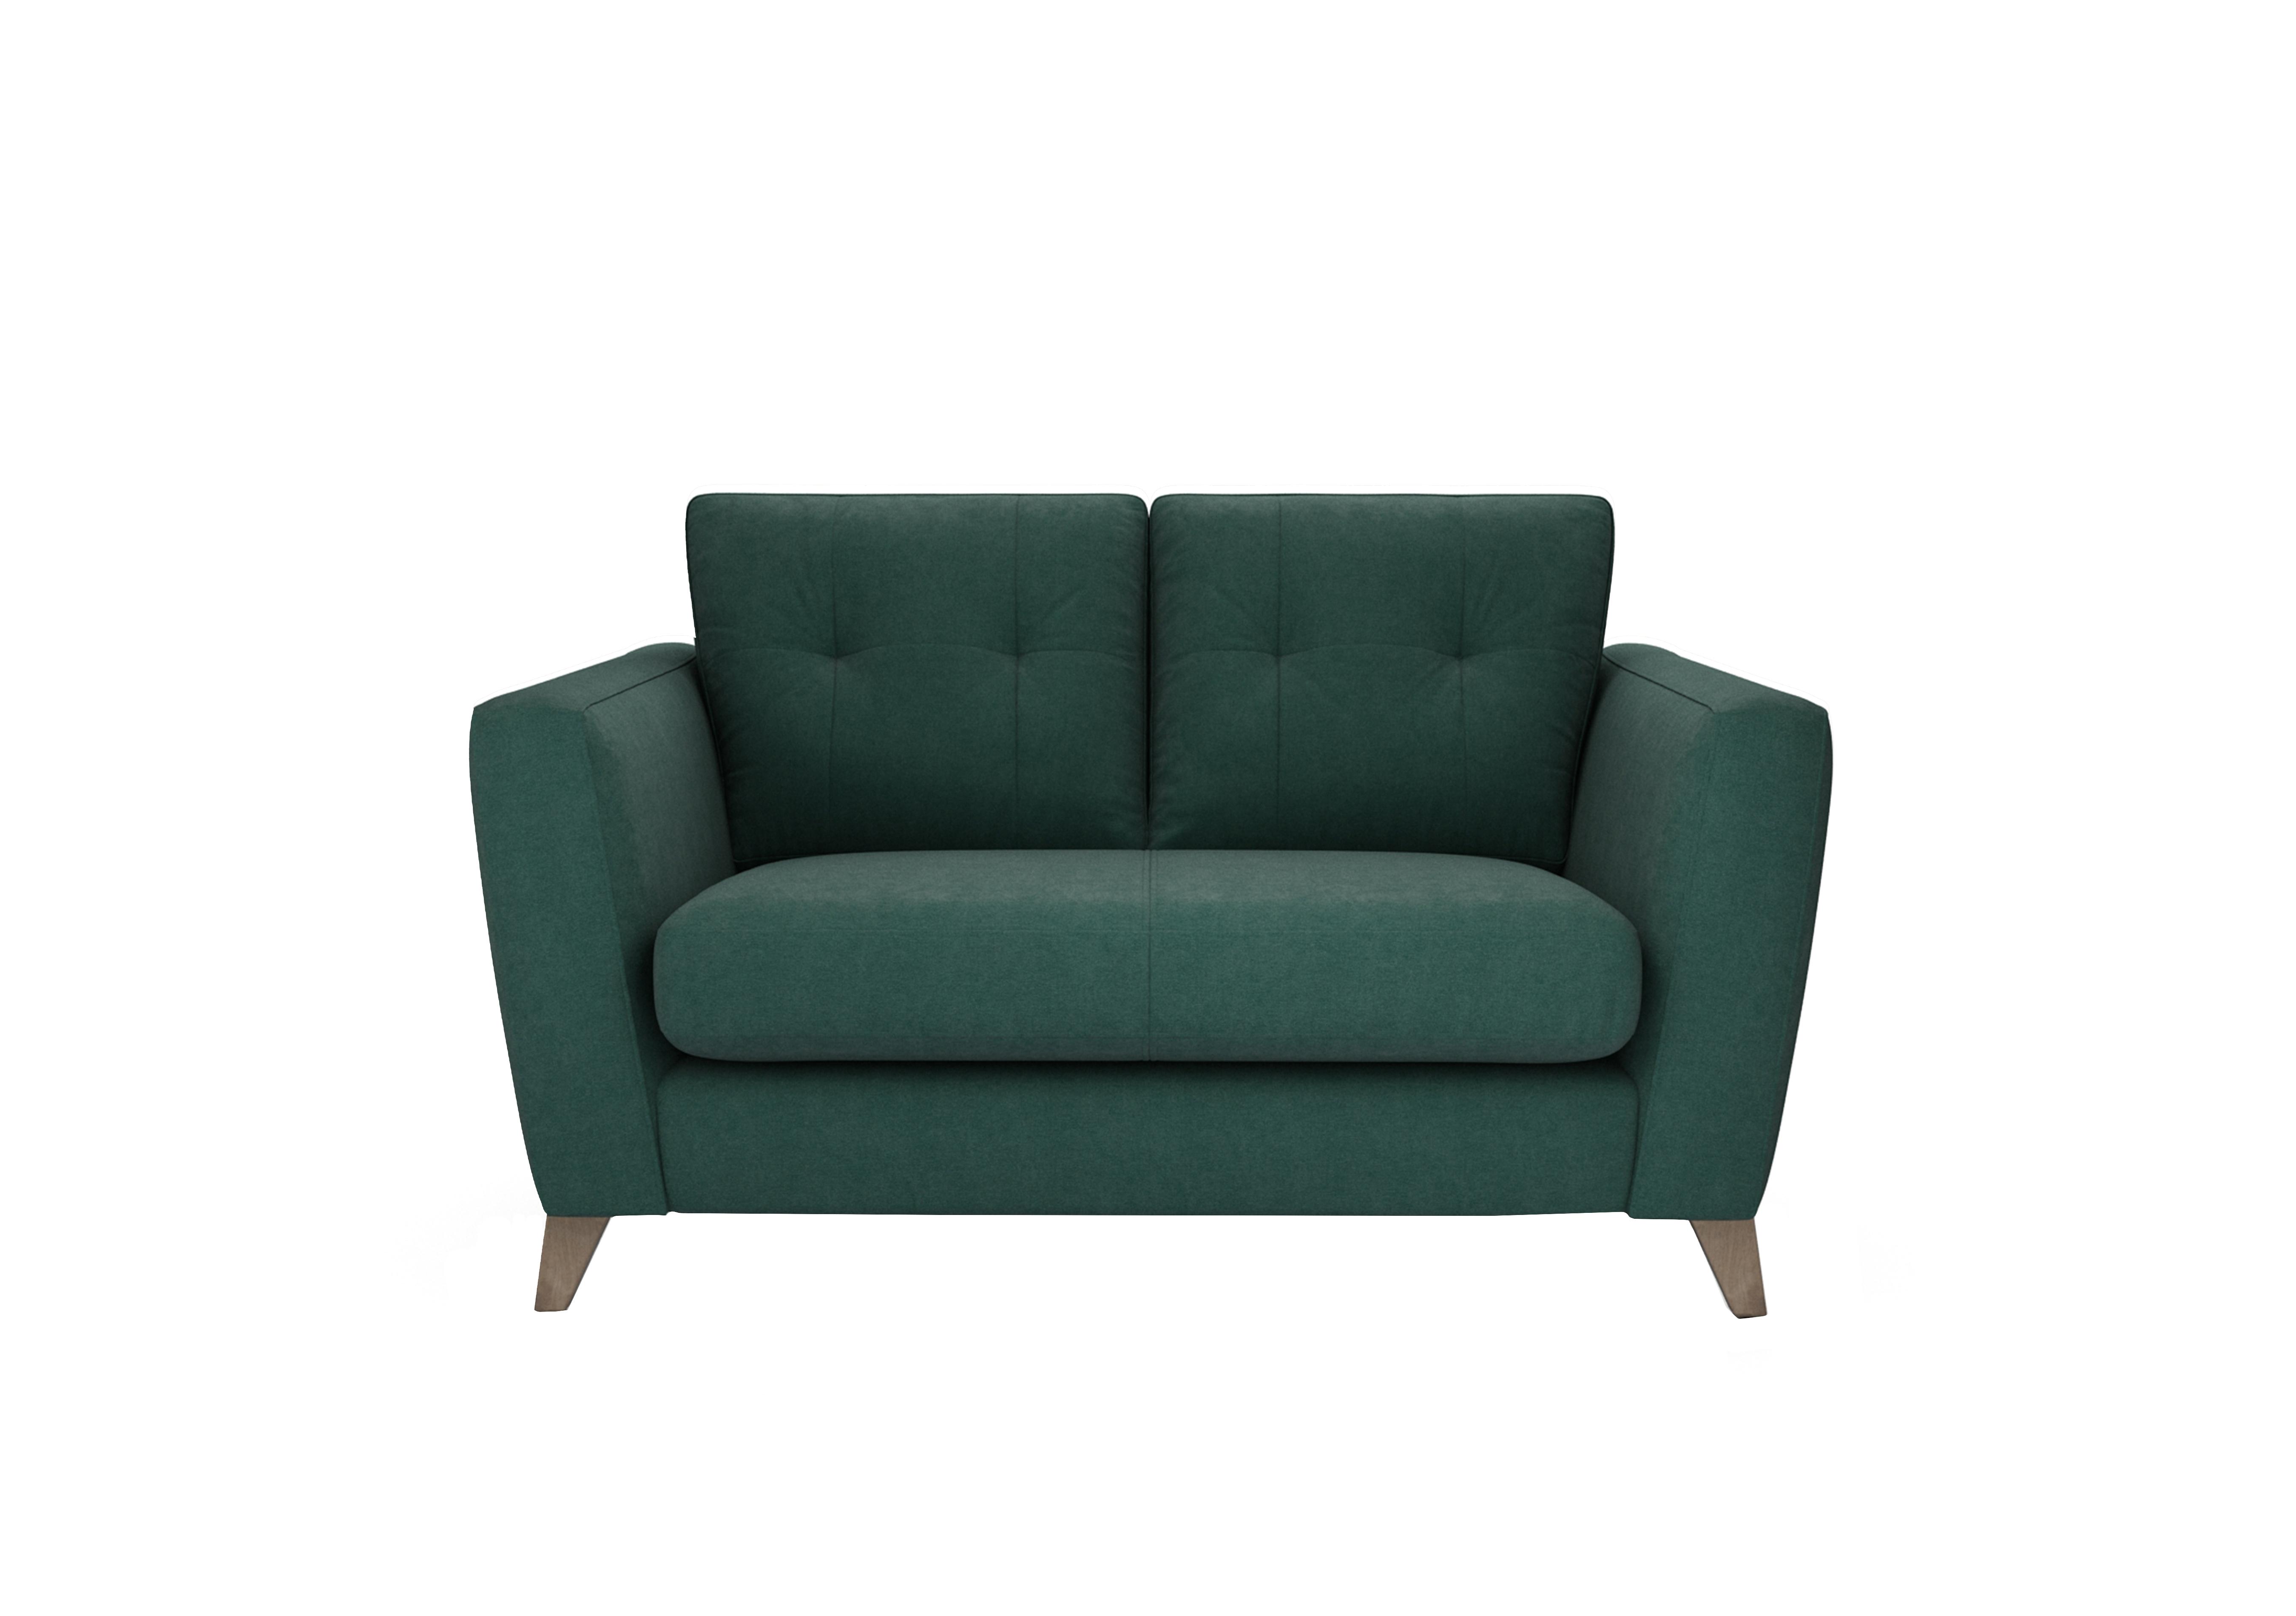 Hermione 2 Seater Fabric Sofa in Cur226 Curly Kale Wo Ft on Furniture Village